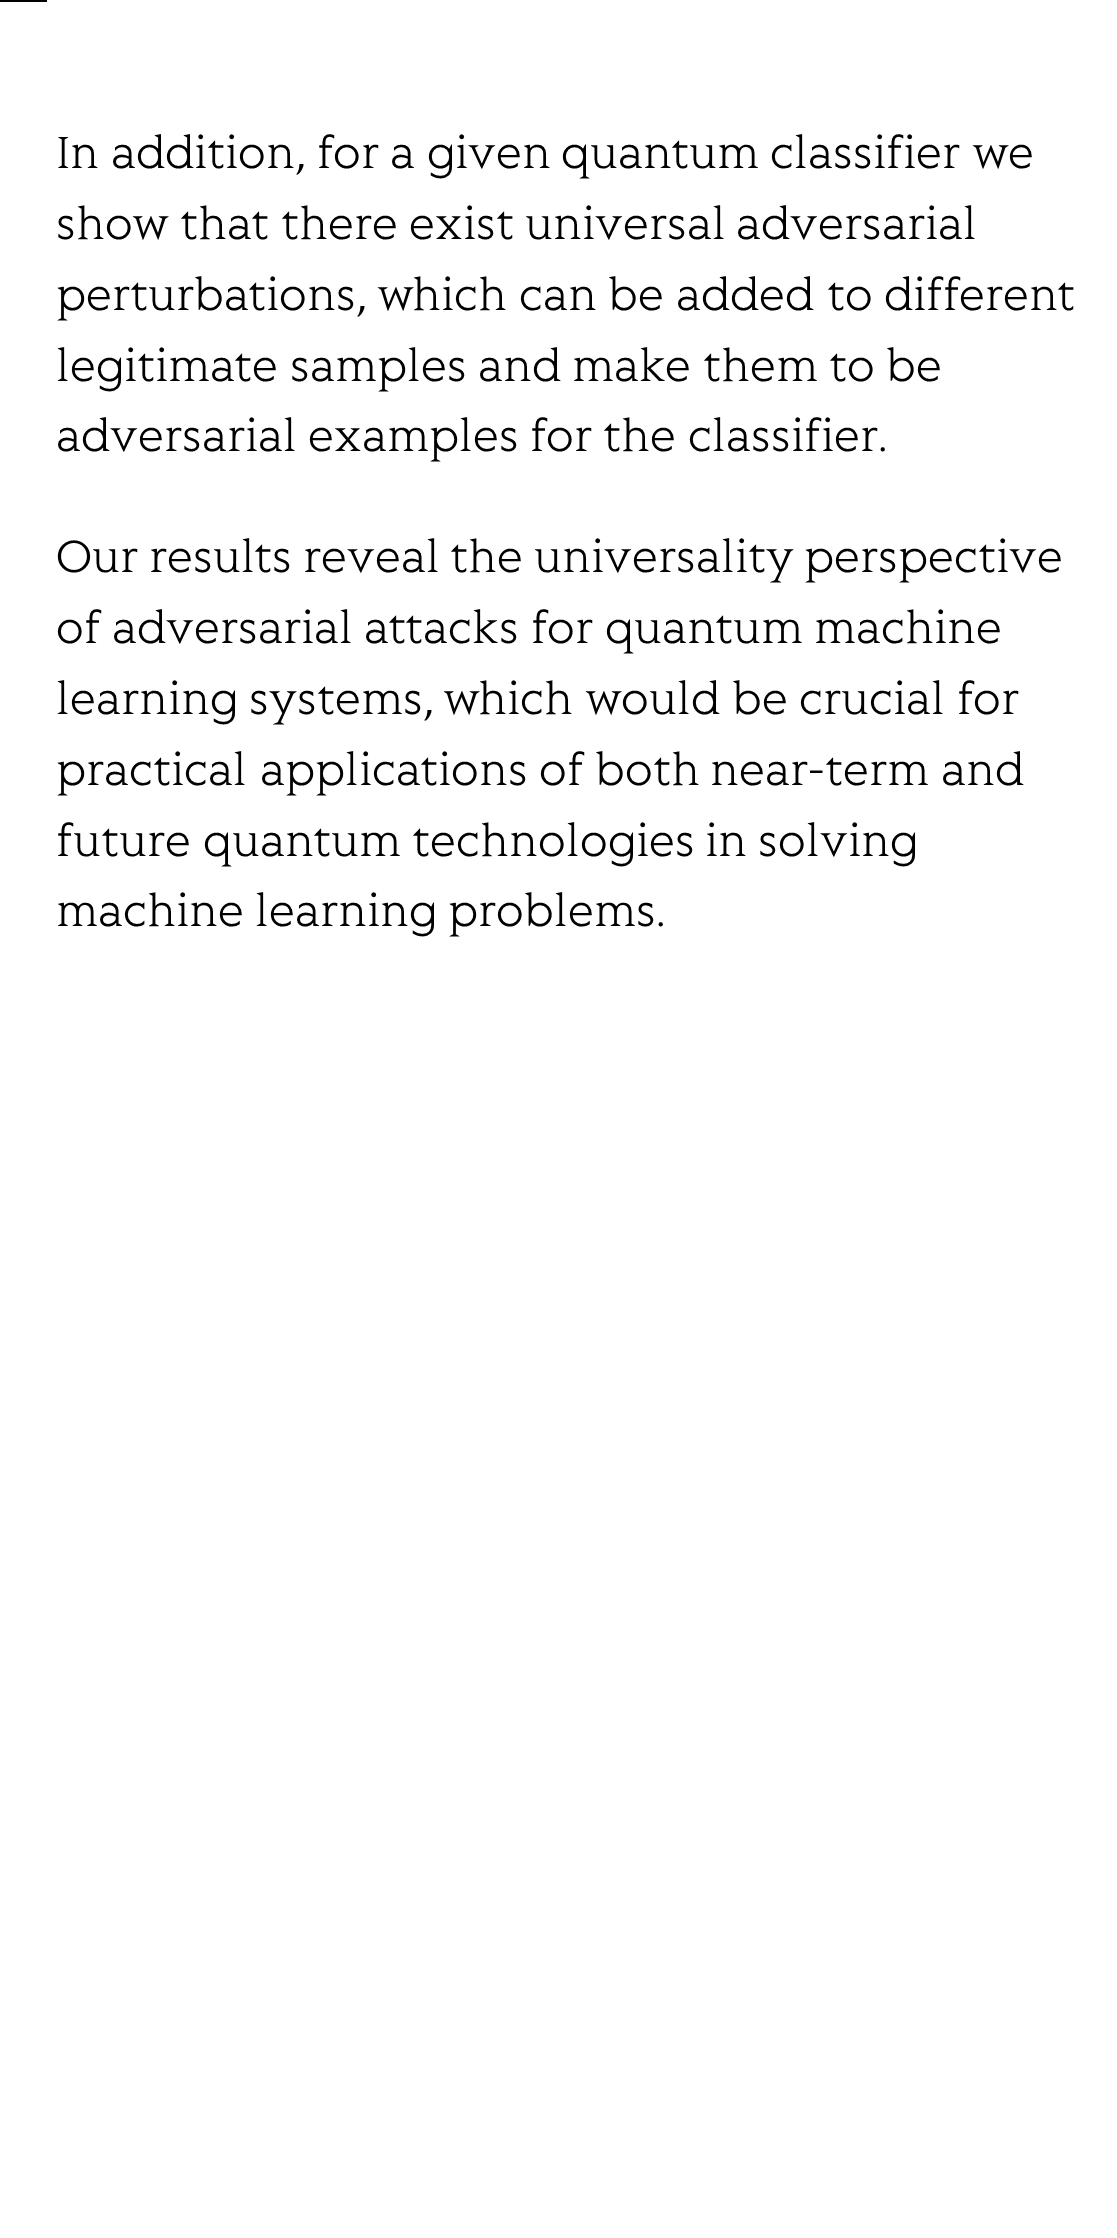 Universal Adversarial Examples and Perturbations for Quantum Classifiers_3